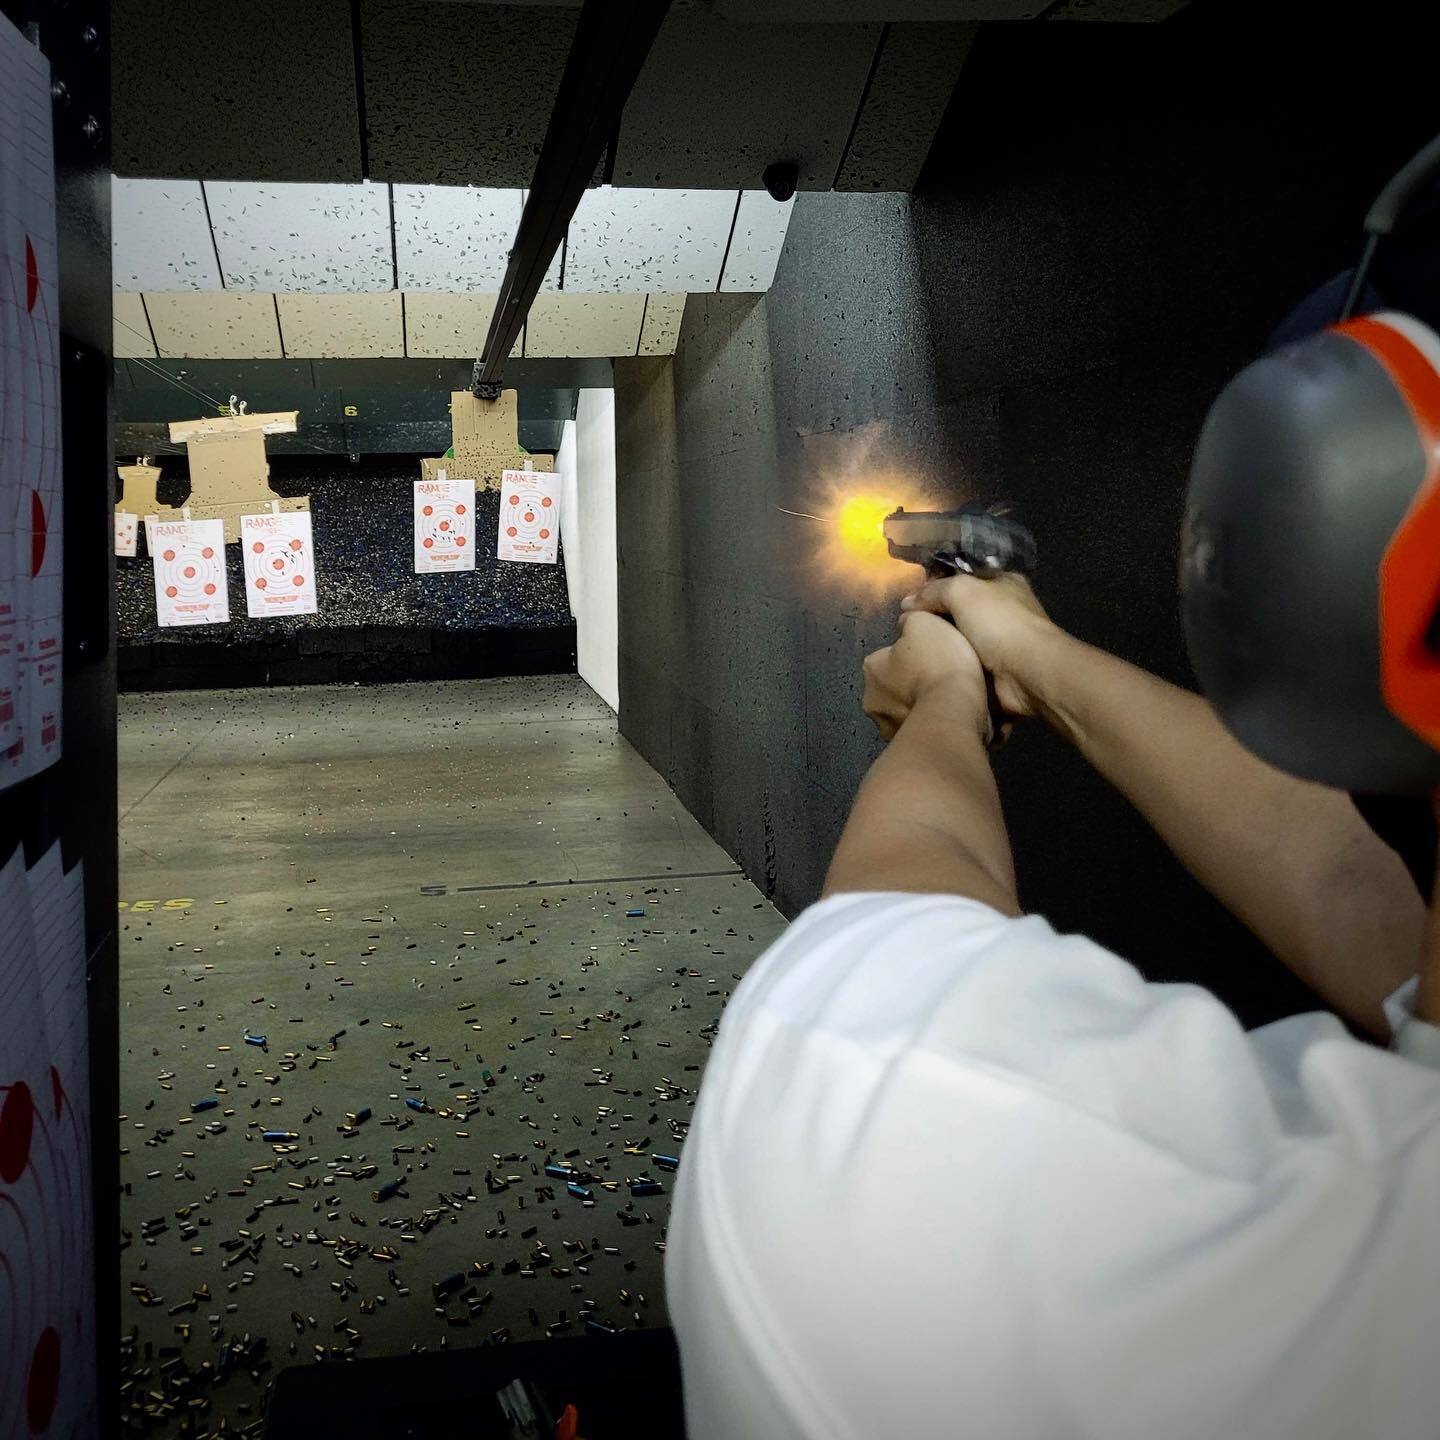 First Time at the Gun Range? Here's What You Need to Know to Stay Safe and Confident